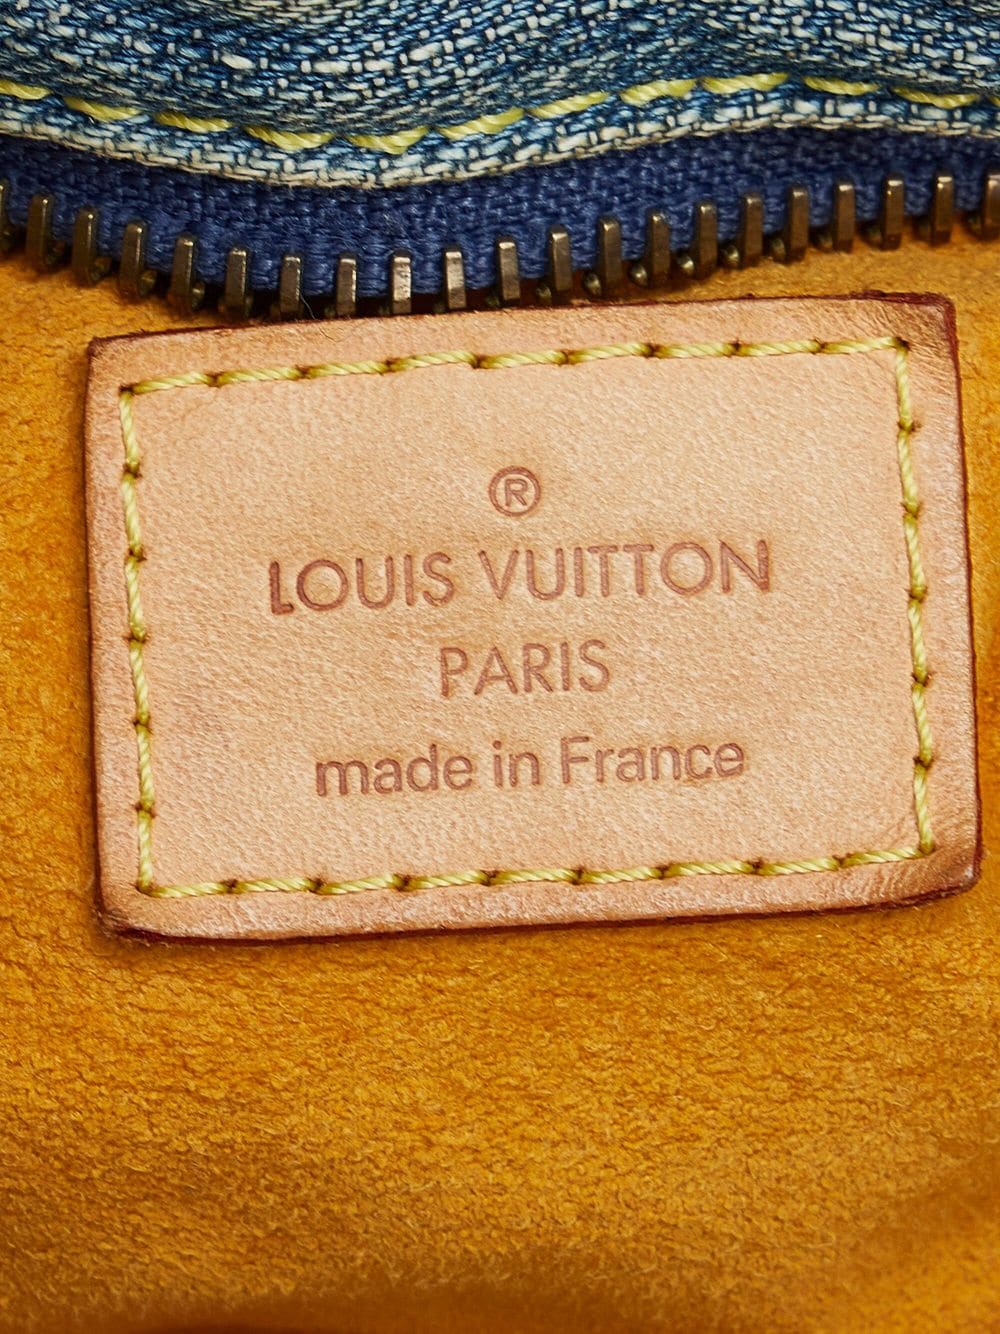 Louis Vuitton 2007 Pre-owned Monogram Denim Neo Cabby Two-Way Bag